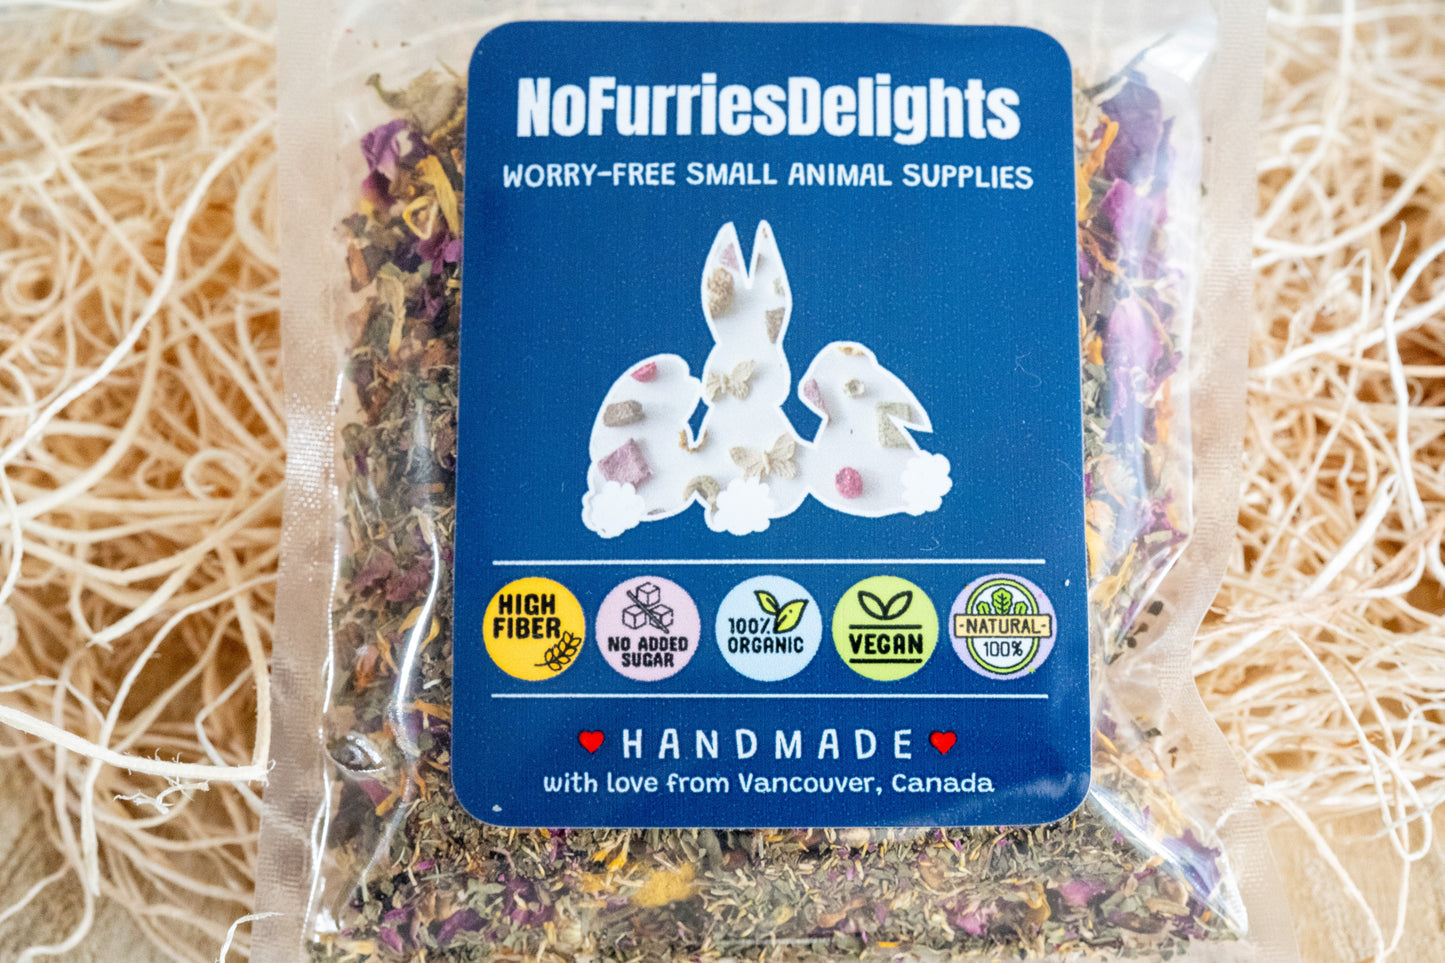 All-in-one organic mix forage, handmade food for bunnies and guinea pigs high fiber, no added sugar, 100% organic, natural and vegan.